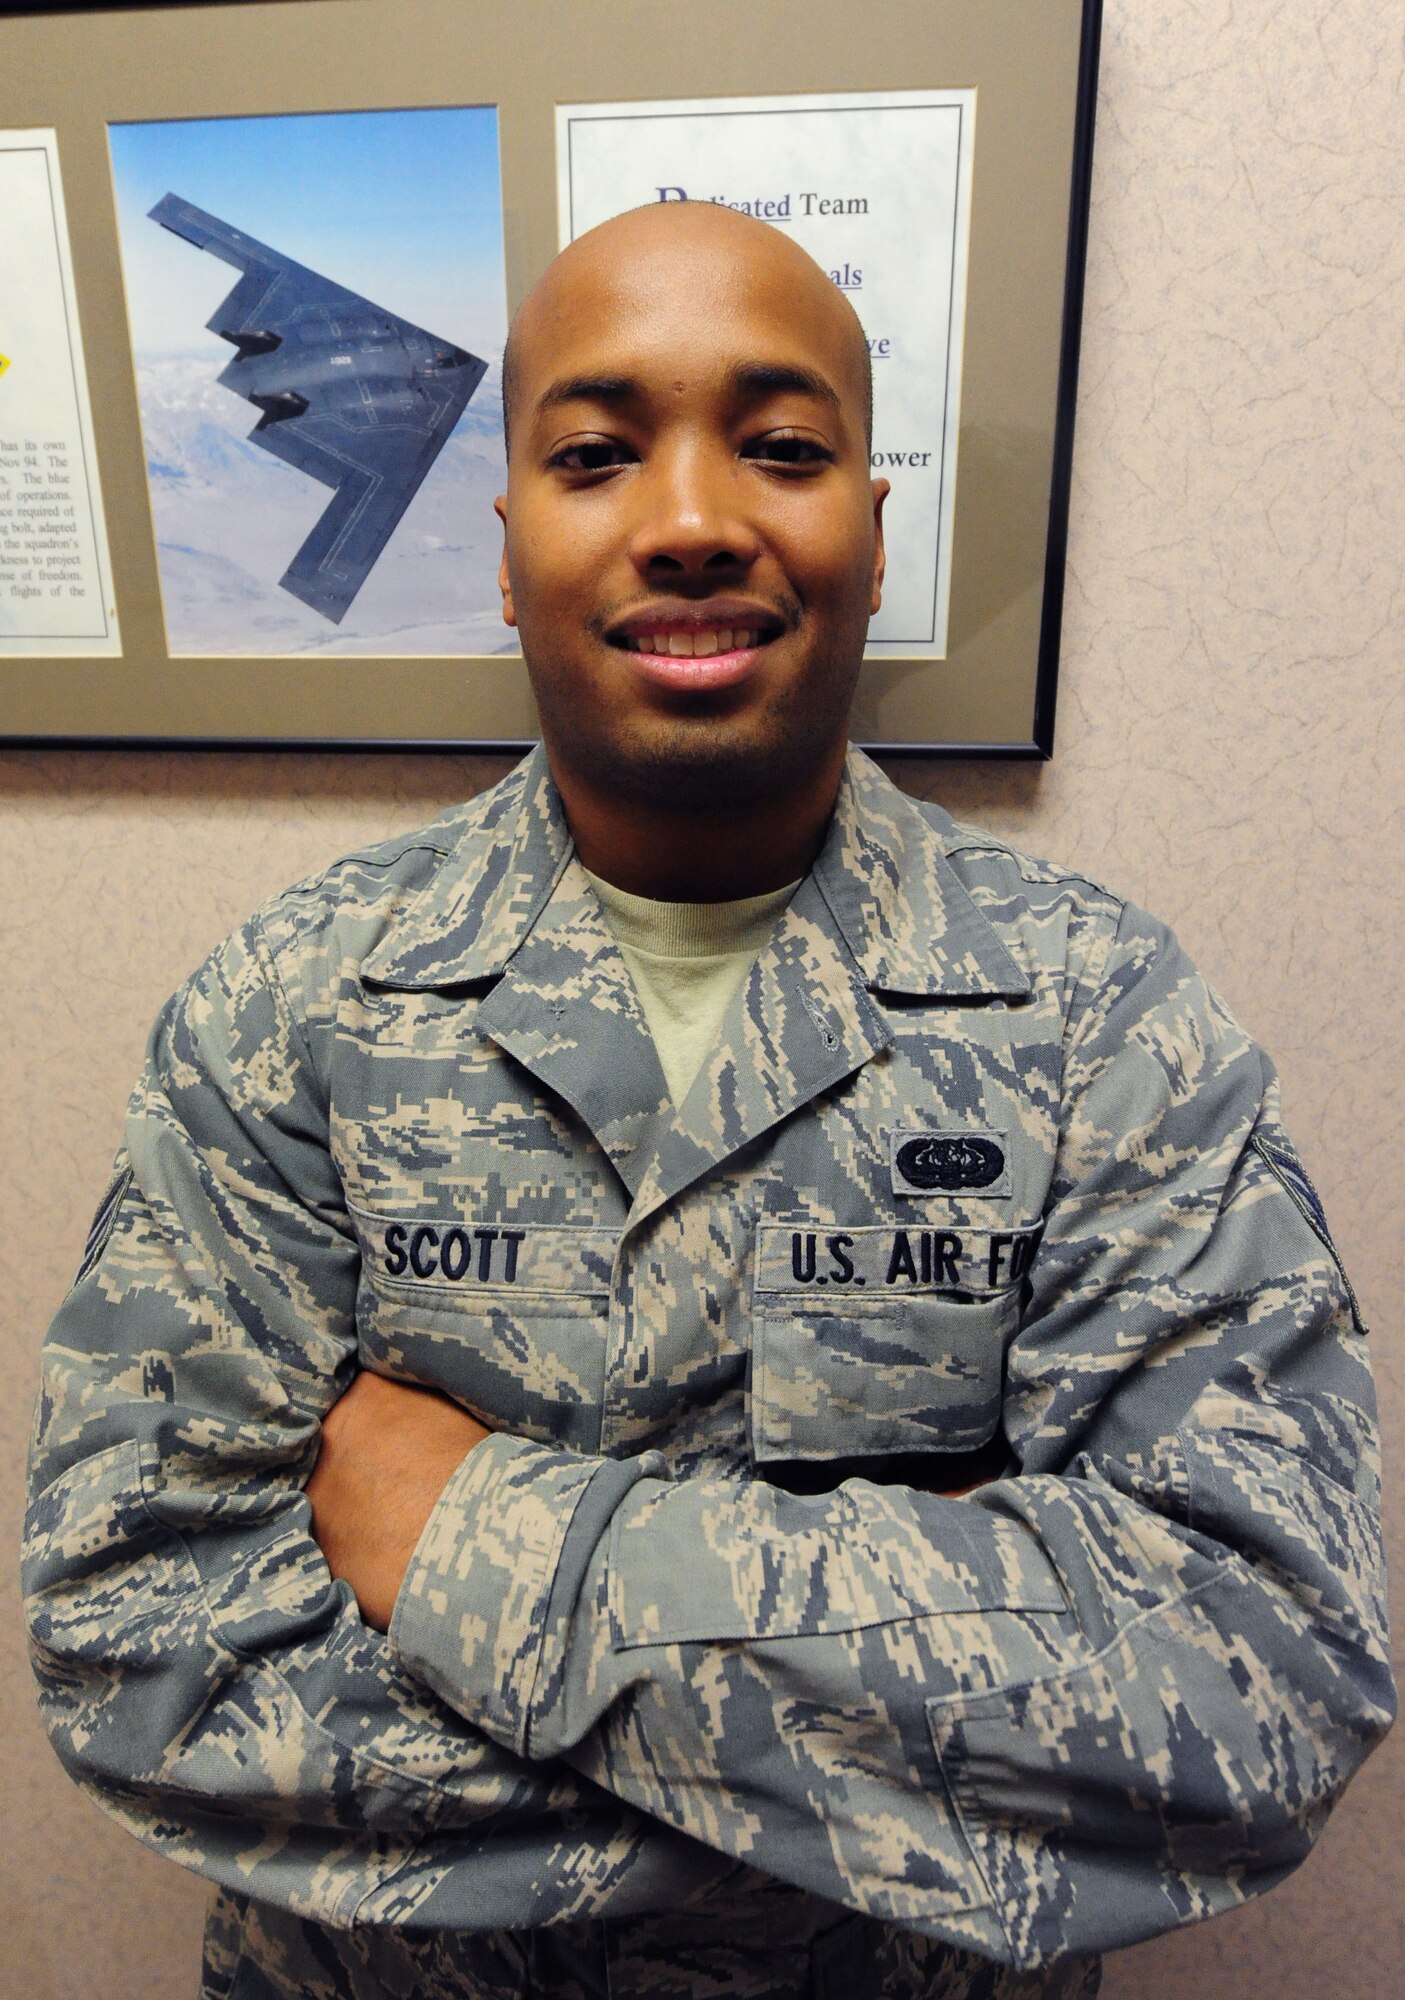 Senior Airman Kenneth Scott, 509th Operations Support Squadron combat crew communications technician, was deployed to Anderson Air Force Base, Guam and Nellis Air Force Base, Nev., from January to March 2013. His career field supports B-2 Spirit flight operations by providing radios that allow pilots to communicate with whoever they need to in a moment's notice. (U.S. Air Force photo by Staff Sgt. Nick Wilson/Released)